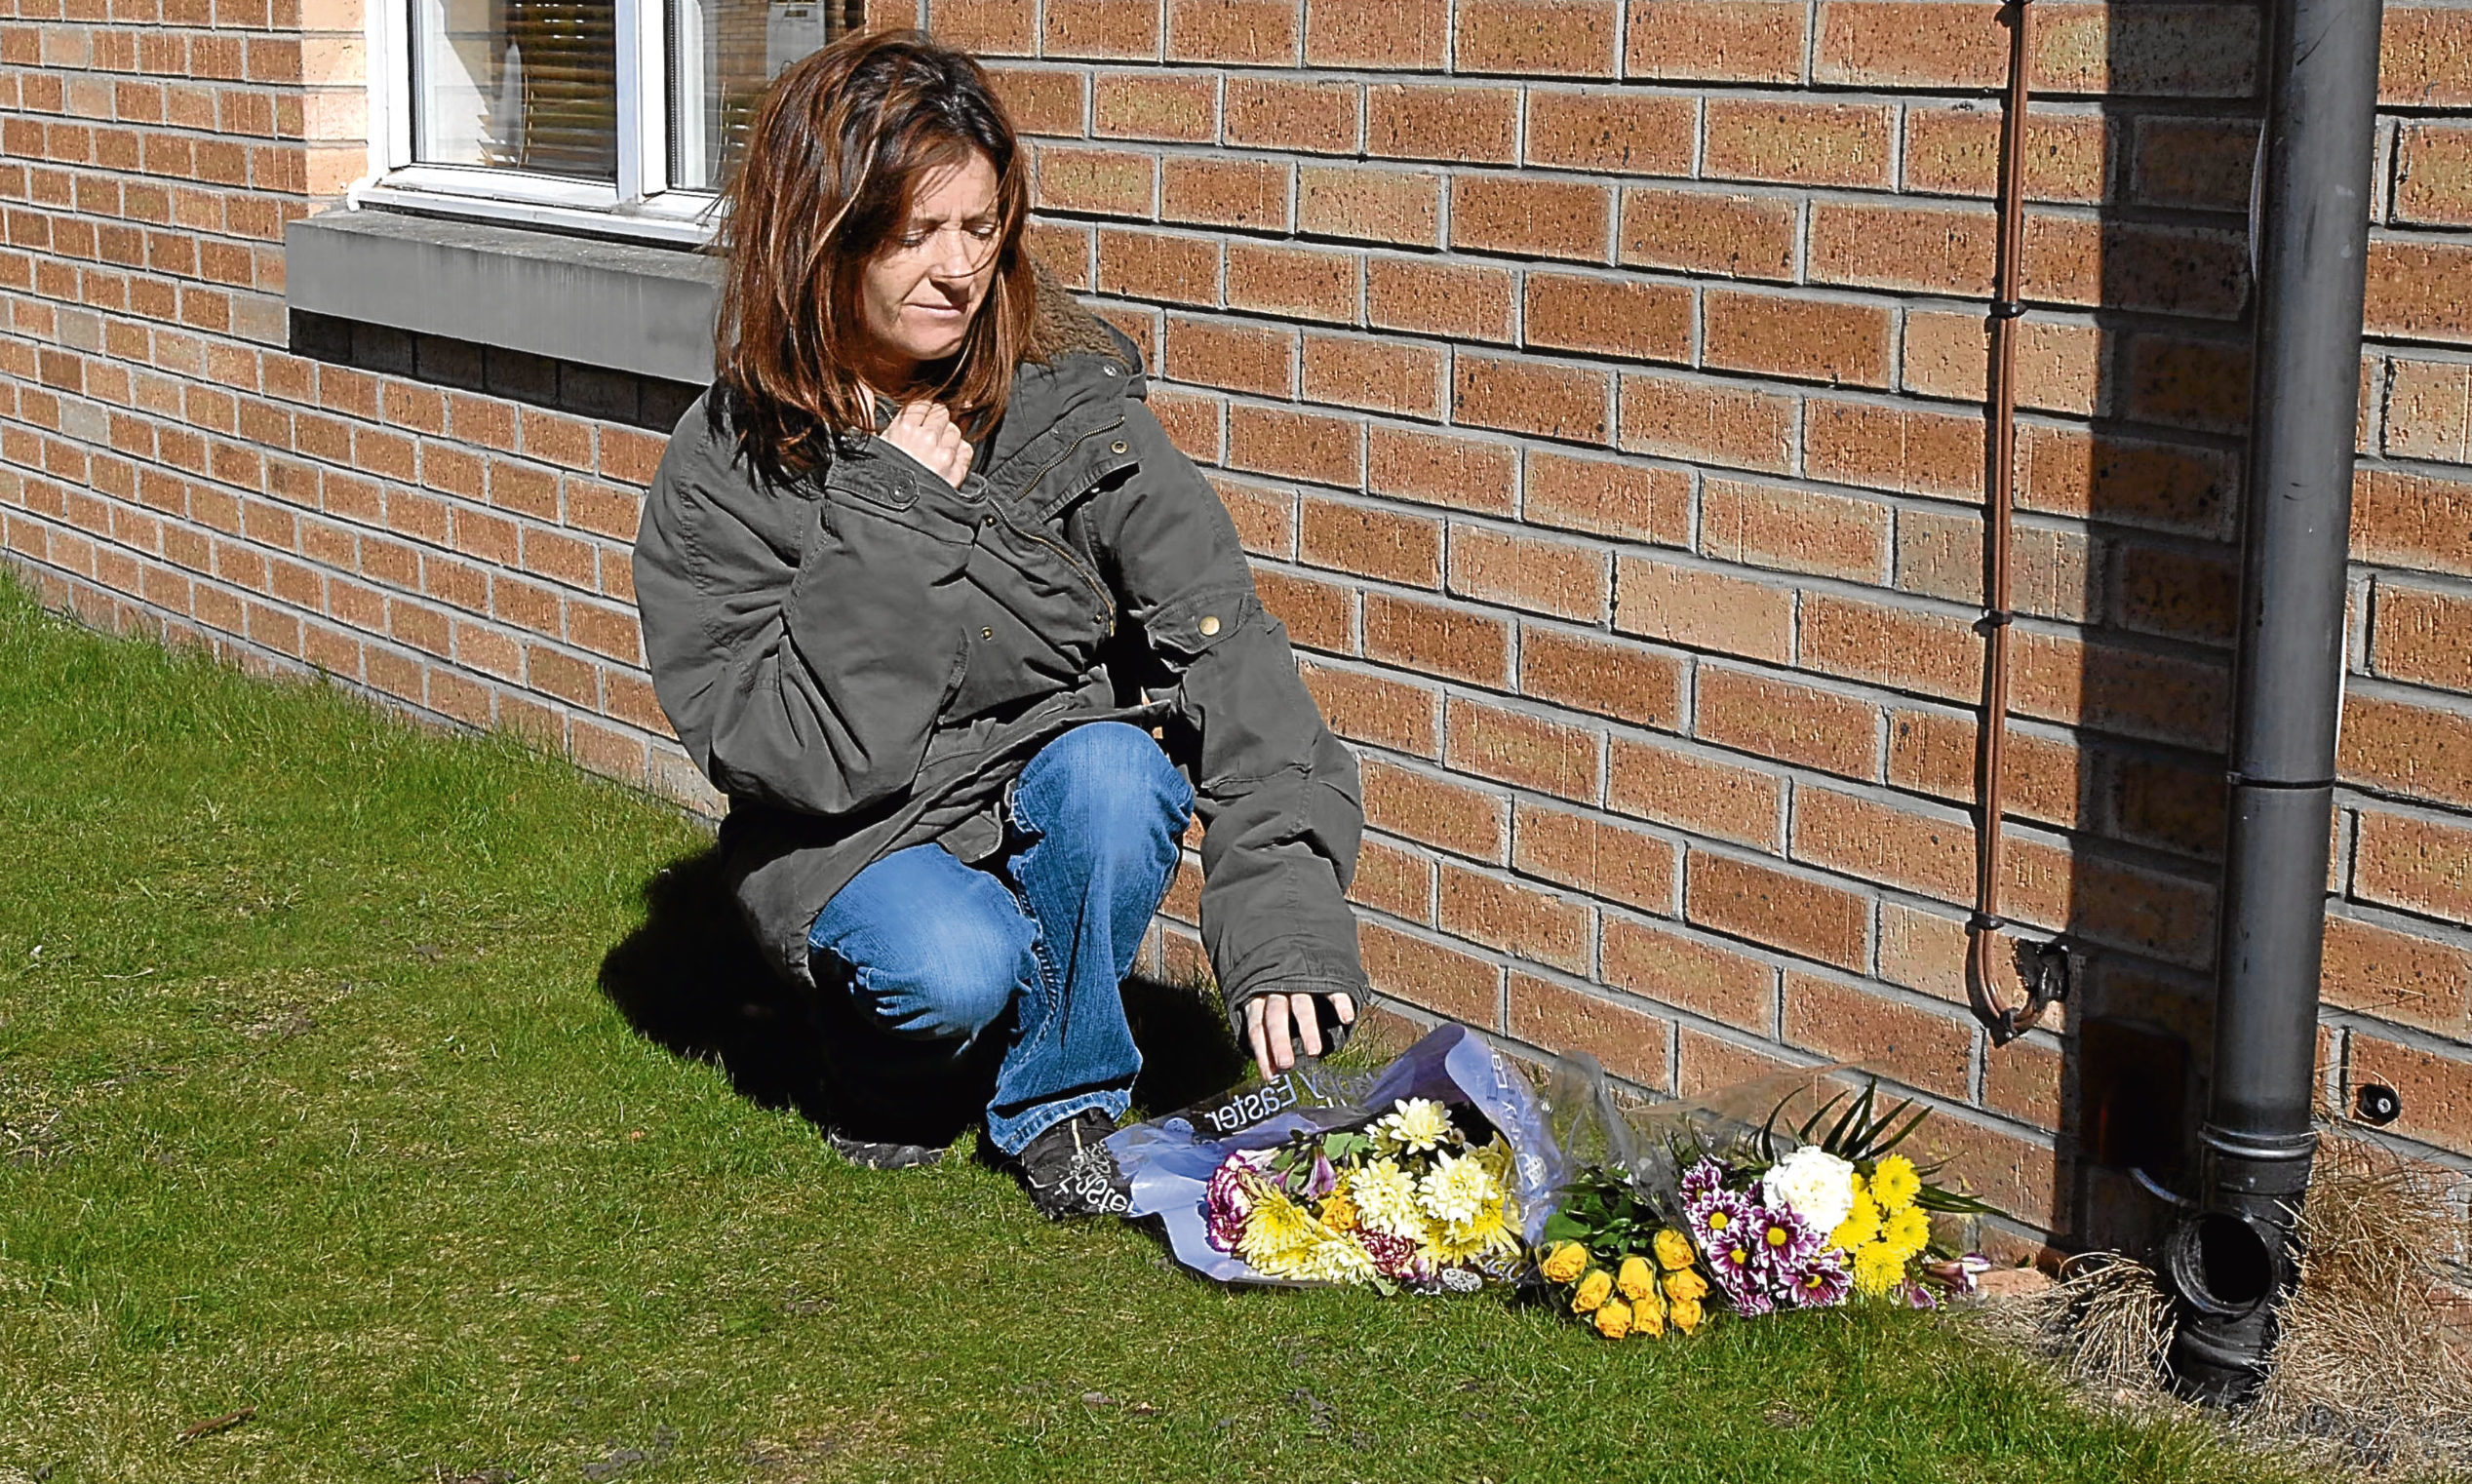 Tracey Braithwaite, who found Sonya Todd’s body, lays flowers at the scene a decade ago.